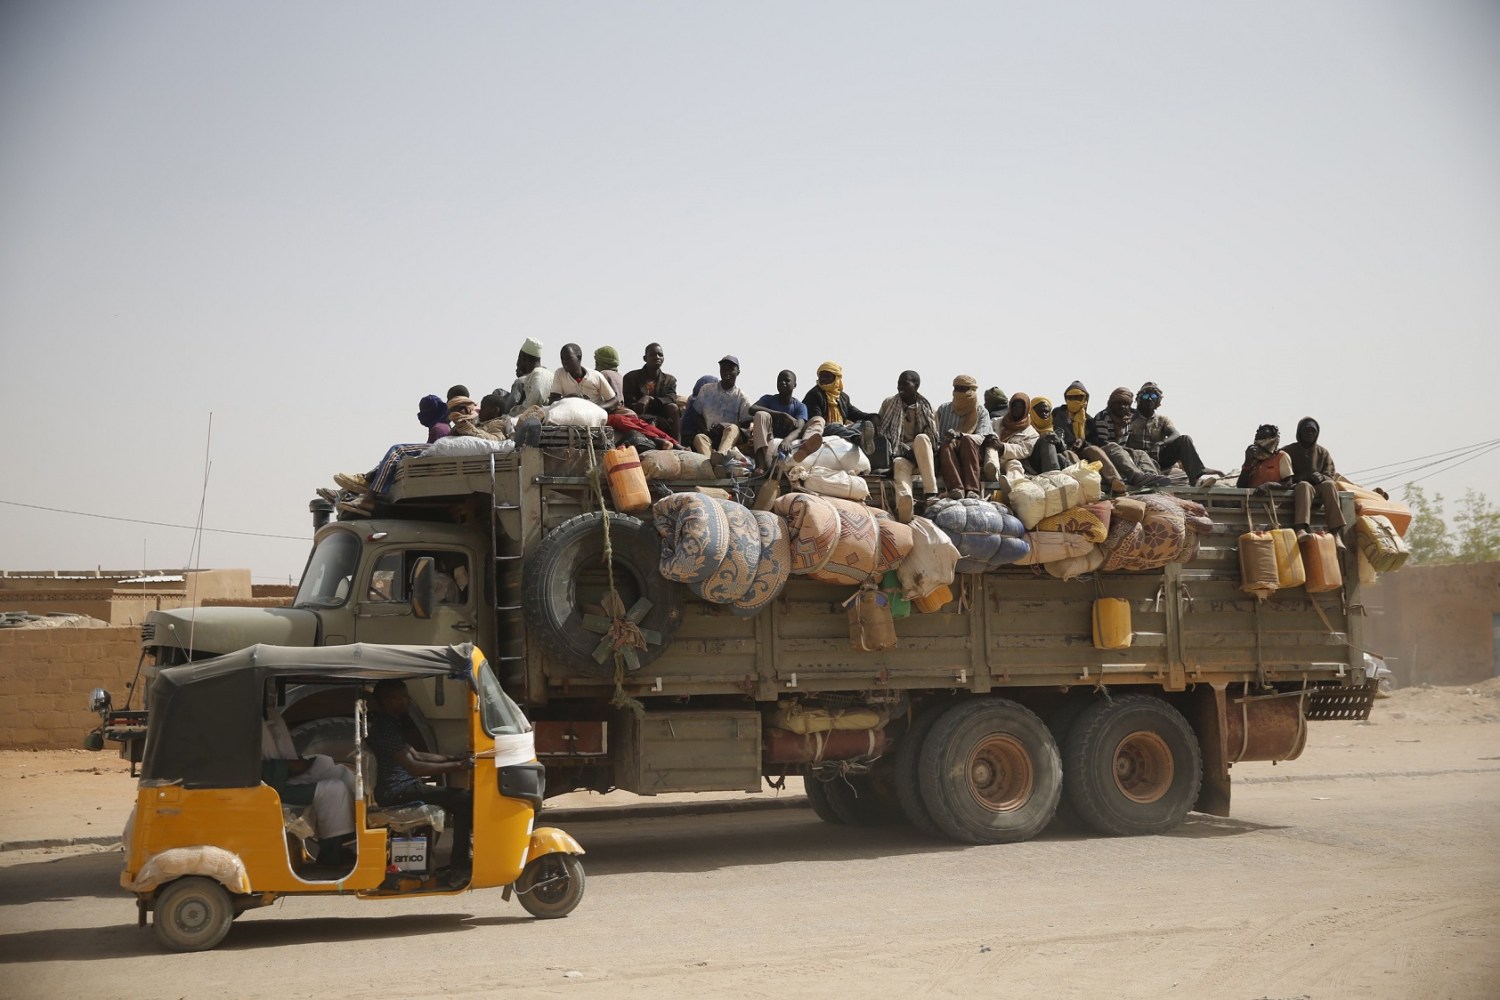 Migrants sit on their belongings in the back of a truck as it is driven through a dusty road in the desert town of Agadez, Niger May 25, 2015. African migrants in overcrowded pickup trucks, encouraged by social media messages from friends who survived the perilous journey across the Mediterranean, set off from Agadez, an ancient trading town on the edge of the Sahara, to cross Niger in the uncertain journey towards Europe via Libya, where the collapse of the government has offered an open door for smugglers. Mostly young men, escaping grinding poverty in neighbouring Benin or Burkina Faso, face bandits and often have to pay bribes en route, on top of the hefty payments to people smugglers. International focus on the issue of migration into Europe has sharpened after hundreds of migrants drowned while trying to cross the sea from North Africa in overcrowded and unsafe vessels. REUTERS/Akintunde Akinleye TPX IMAGES OF THE DAY PICTURE 35 OF 36 FOR WIDER IMAGE STORY SMUGGLED THROUGH NIGERSEARCH SAHARA AKINLEYE FOR ALL IMAGES TPX IMAGES OF THE DAY - GF10000110096